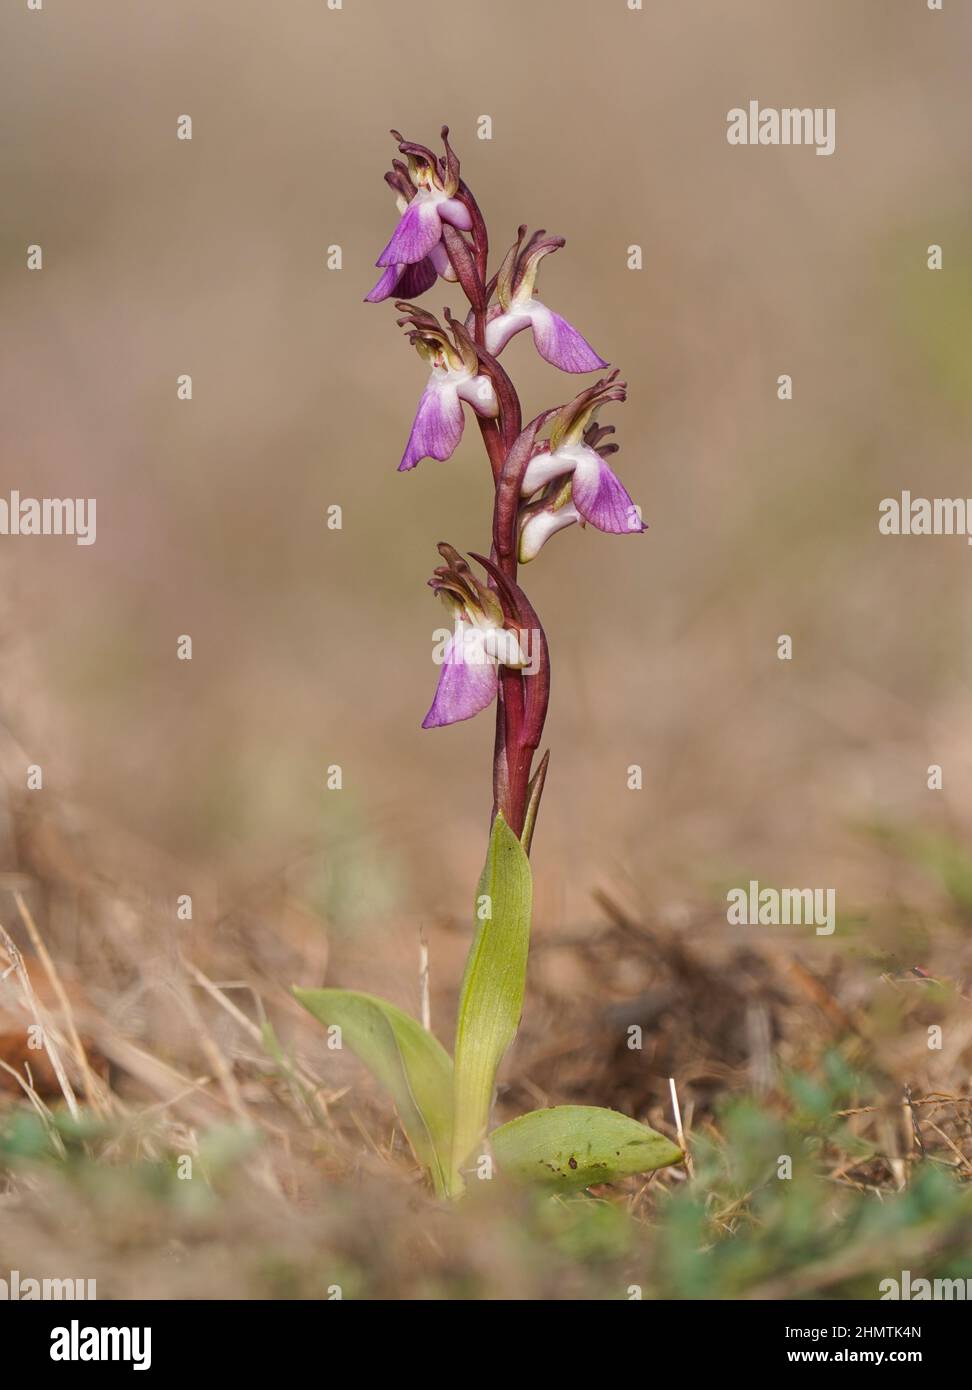 Fan-lipped Orchid, Anacamptis collina, Orchis collina, wild orchid in Andalusia, Southern Spain. Stock Photo